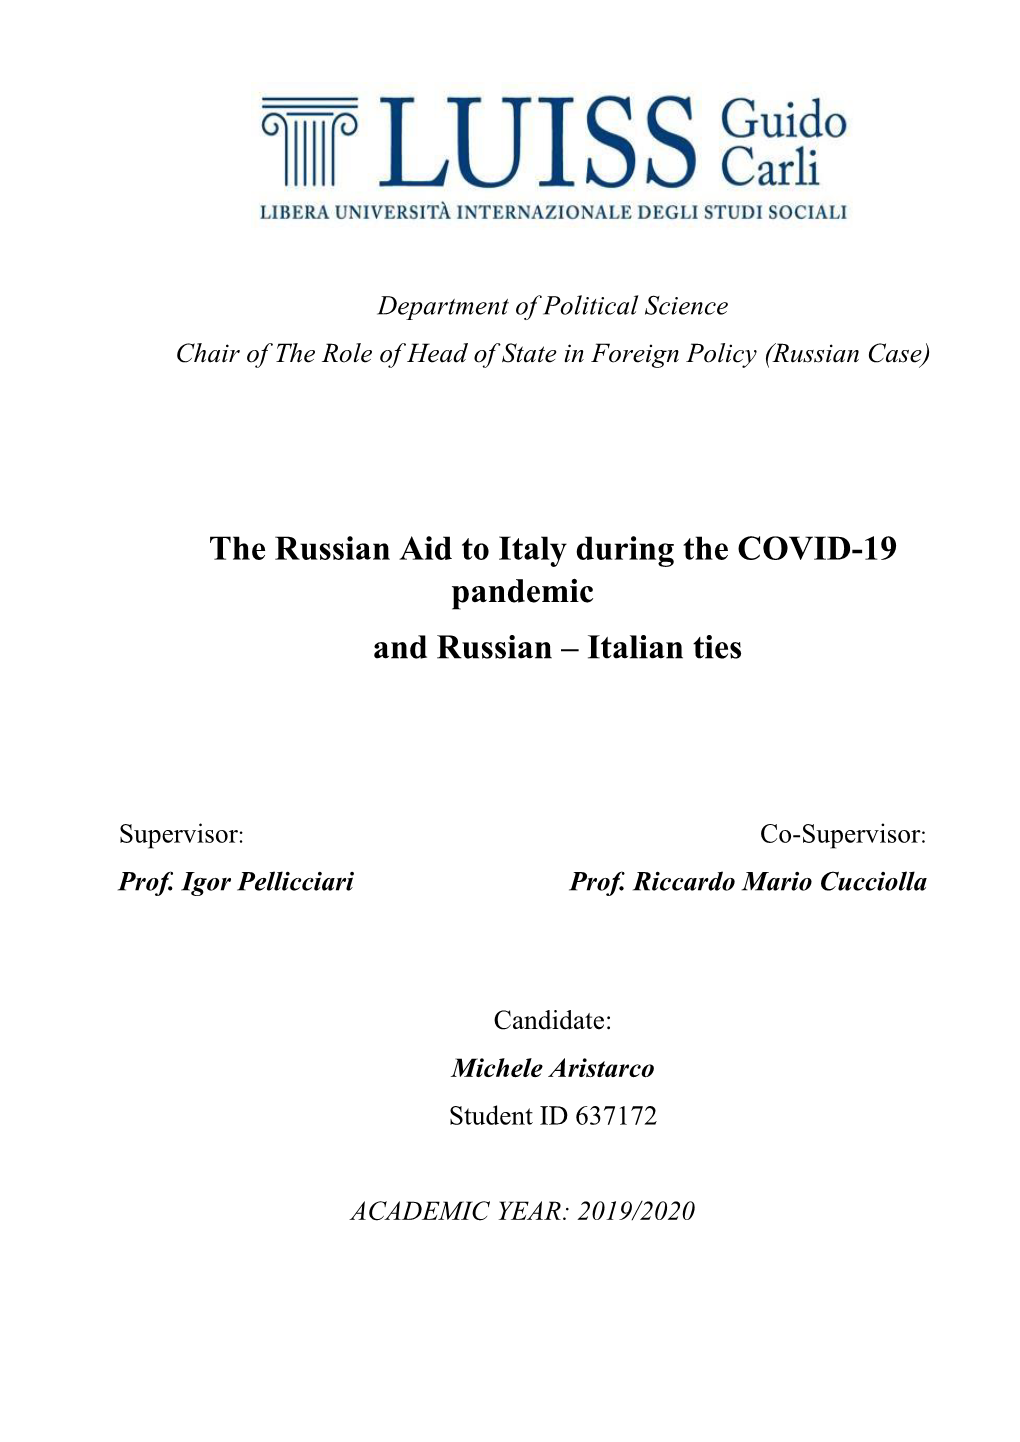 The Russian Aid to Italy During the COVID-19 Pandemic and Russian – Italian Ties